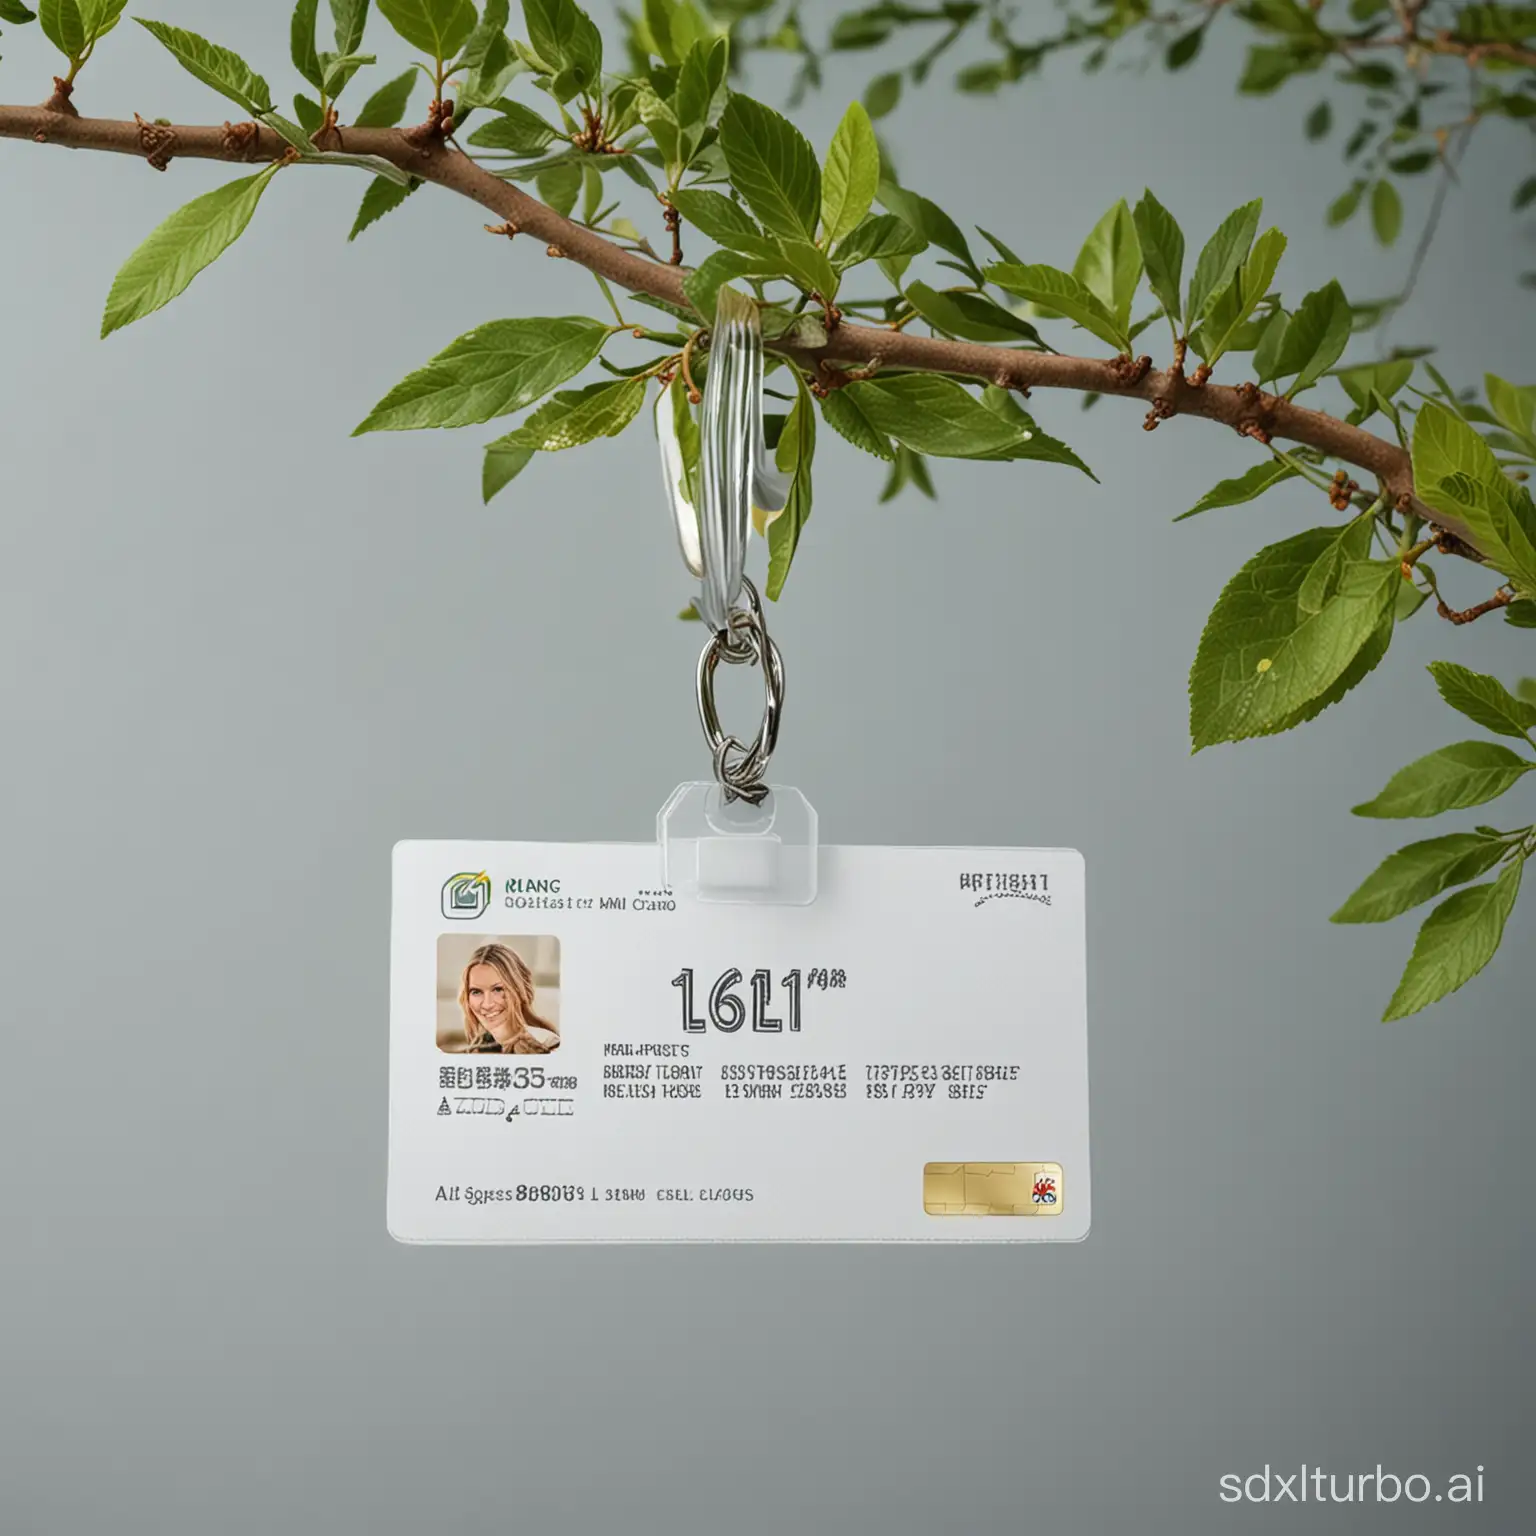 A mini work ID card set is placed on a branch with a simple background, leaves, close-up view, hdr, oc, 4k